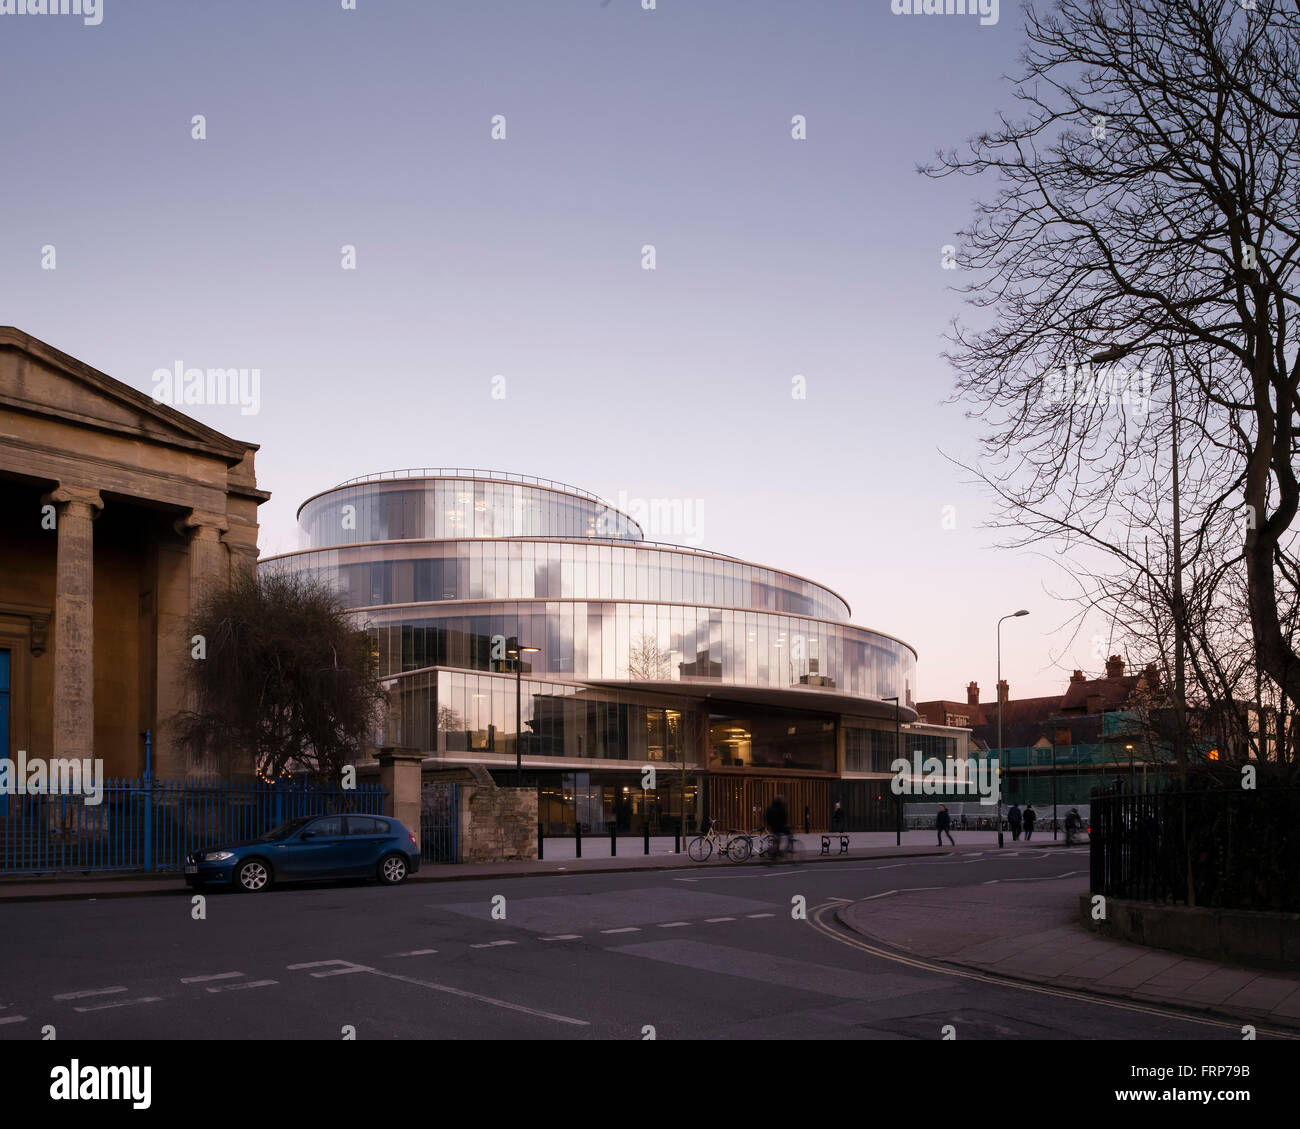 General view of front elevation from street at dusk. The Blavatnik School of Government at the University of Oxford, Oxford, Uni Stock Photo